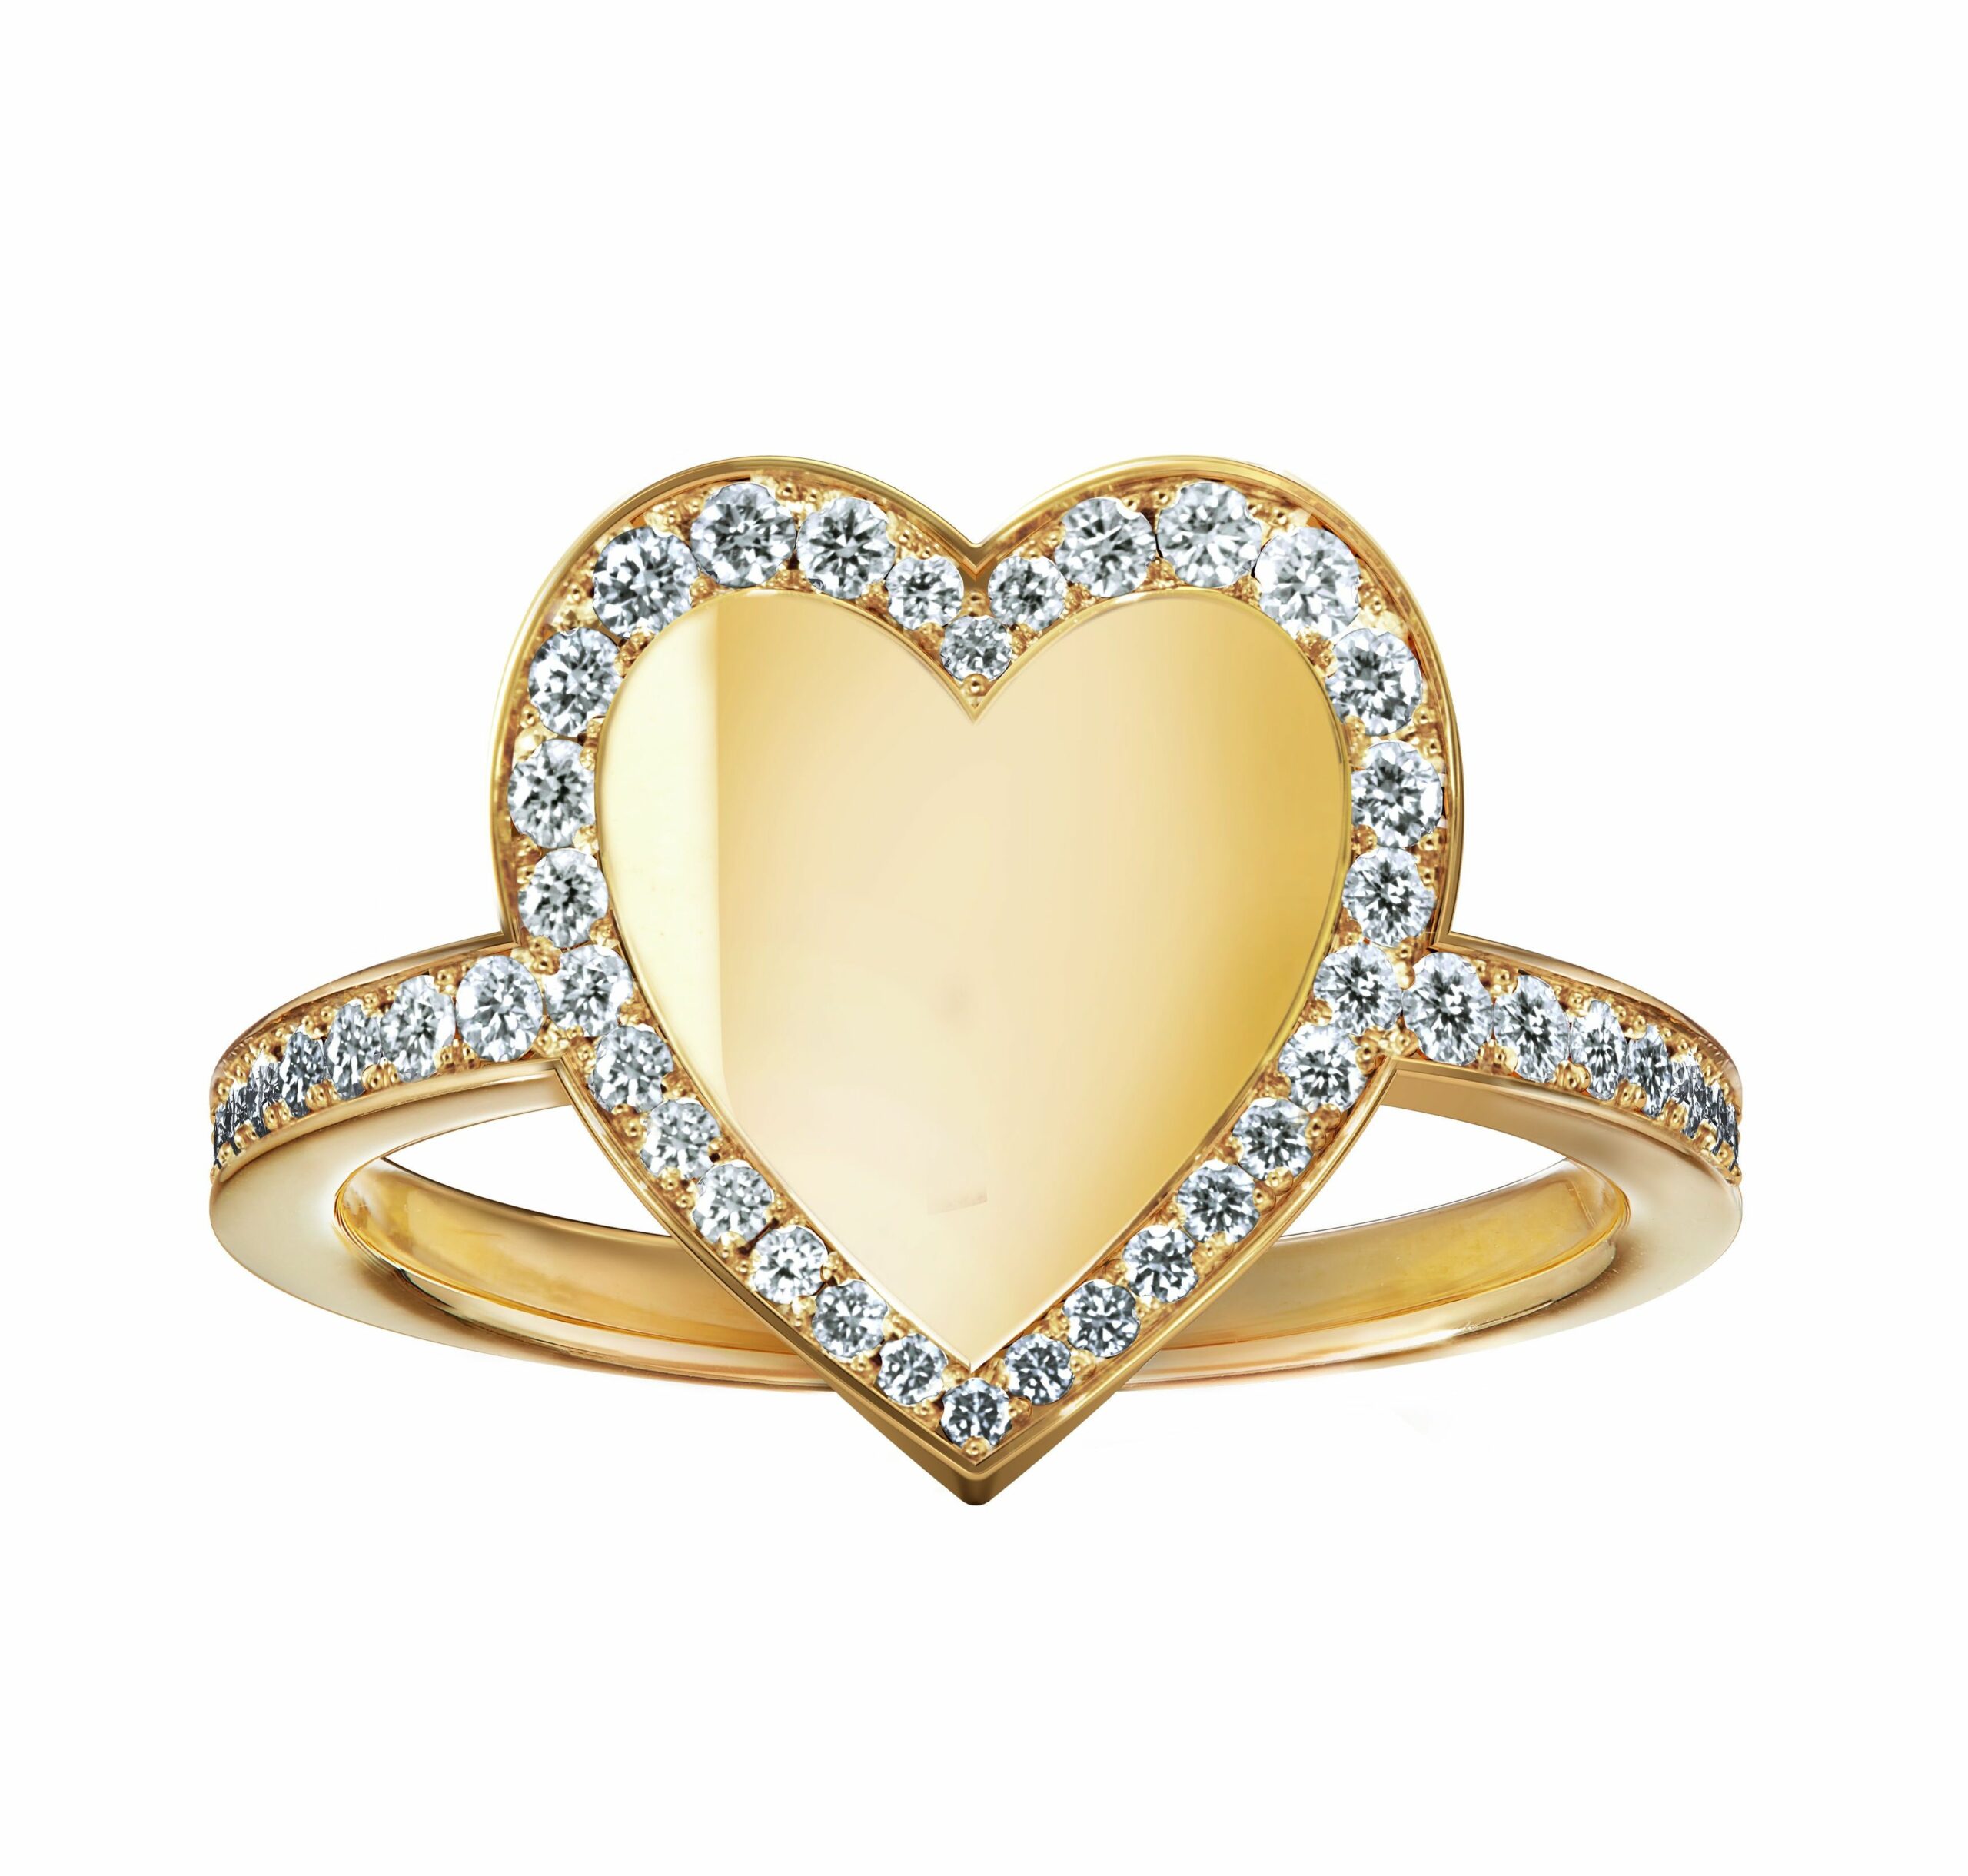 heart-shaped-jewellery-for-valentines-day-and-beyond-harvey-owen